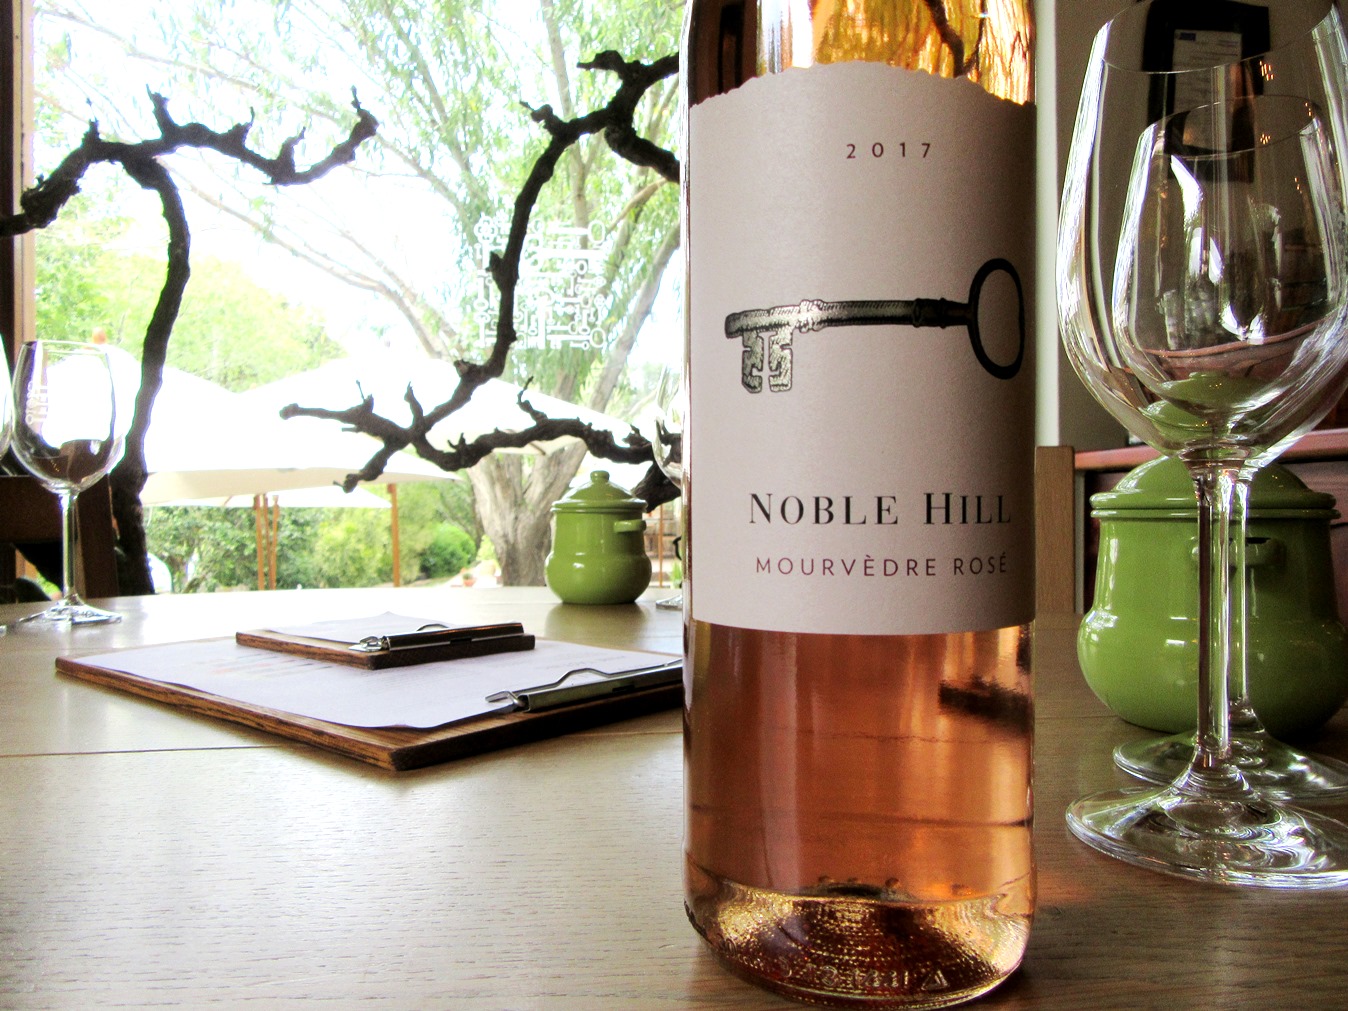 Noble Hill, Mourvedre Rosé 2017, Simonsberg-Paarl, South Africa, Wine Casual